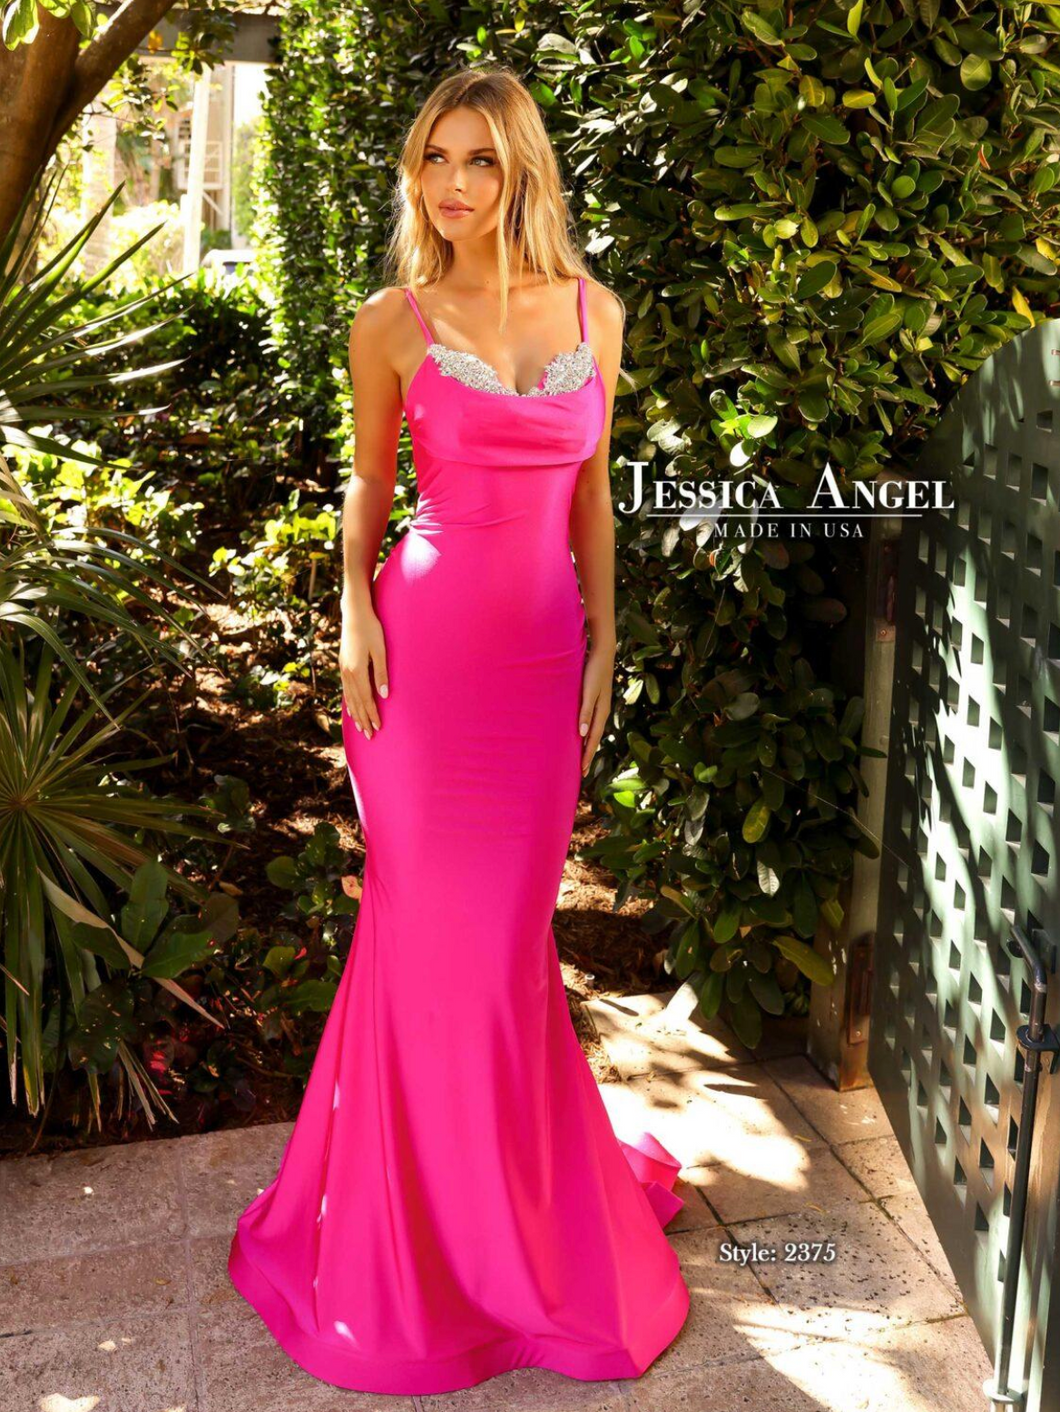 Jessica Angel 2375 [click to see available colors]